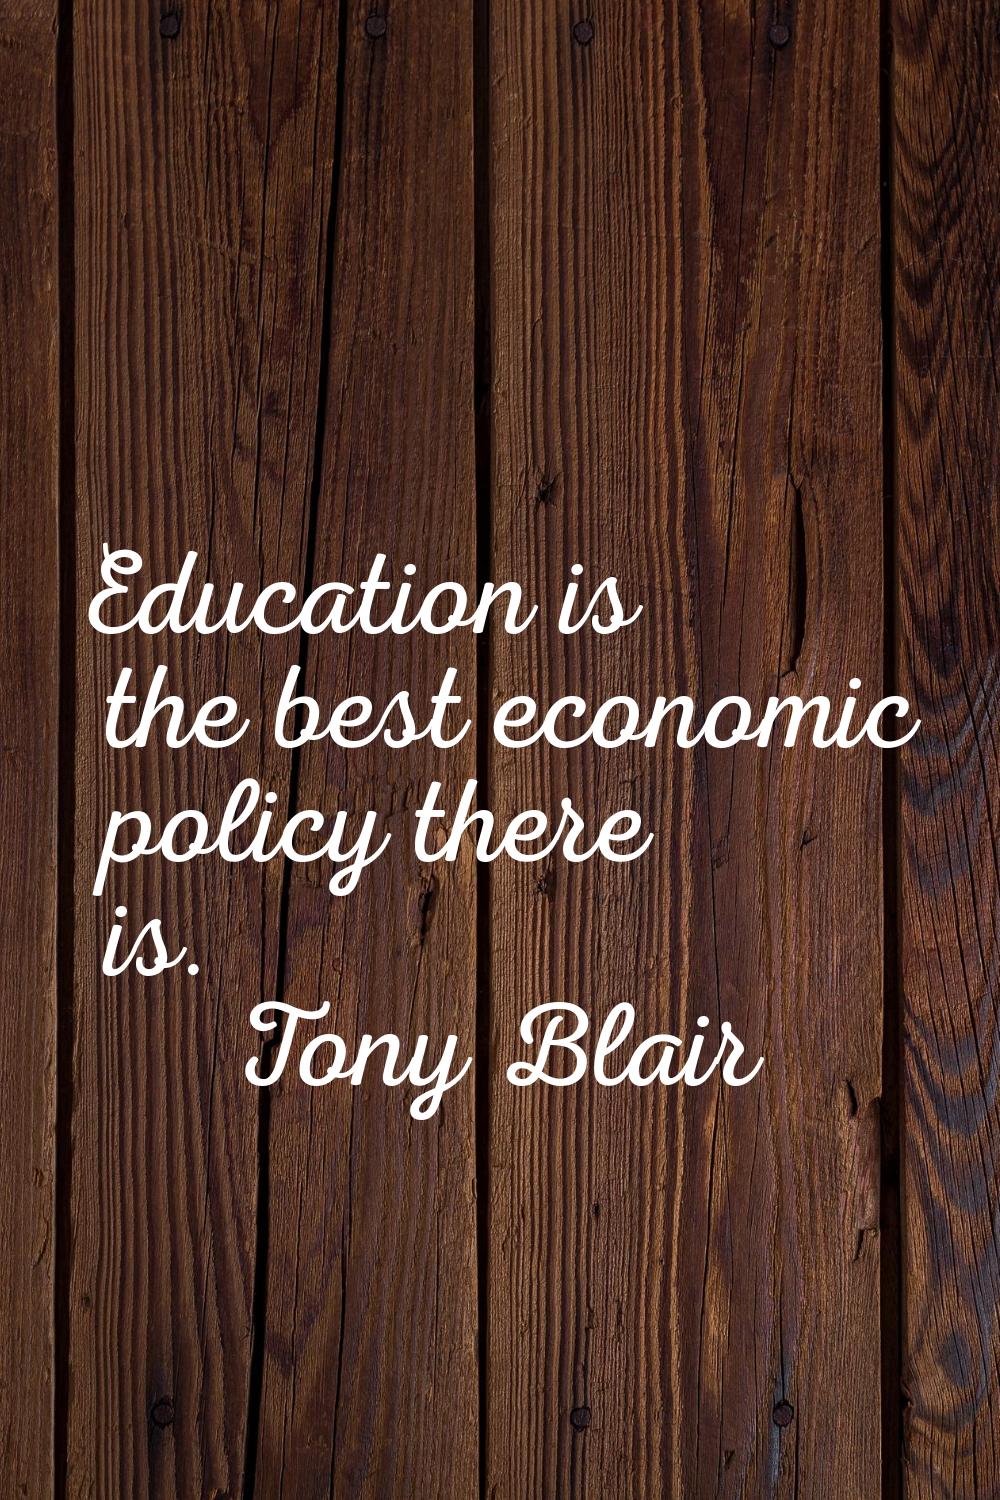 Education is the best economic policy there is.